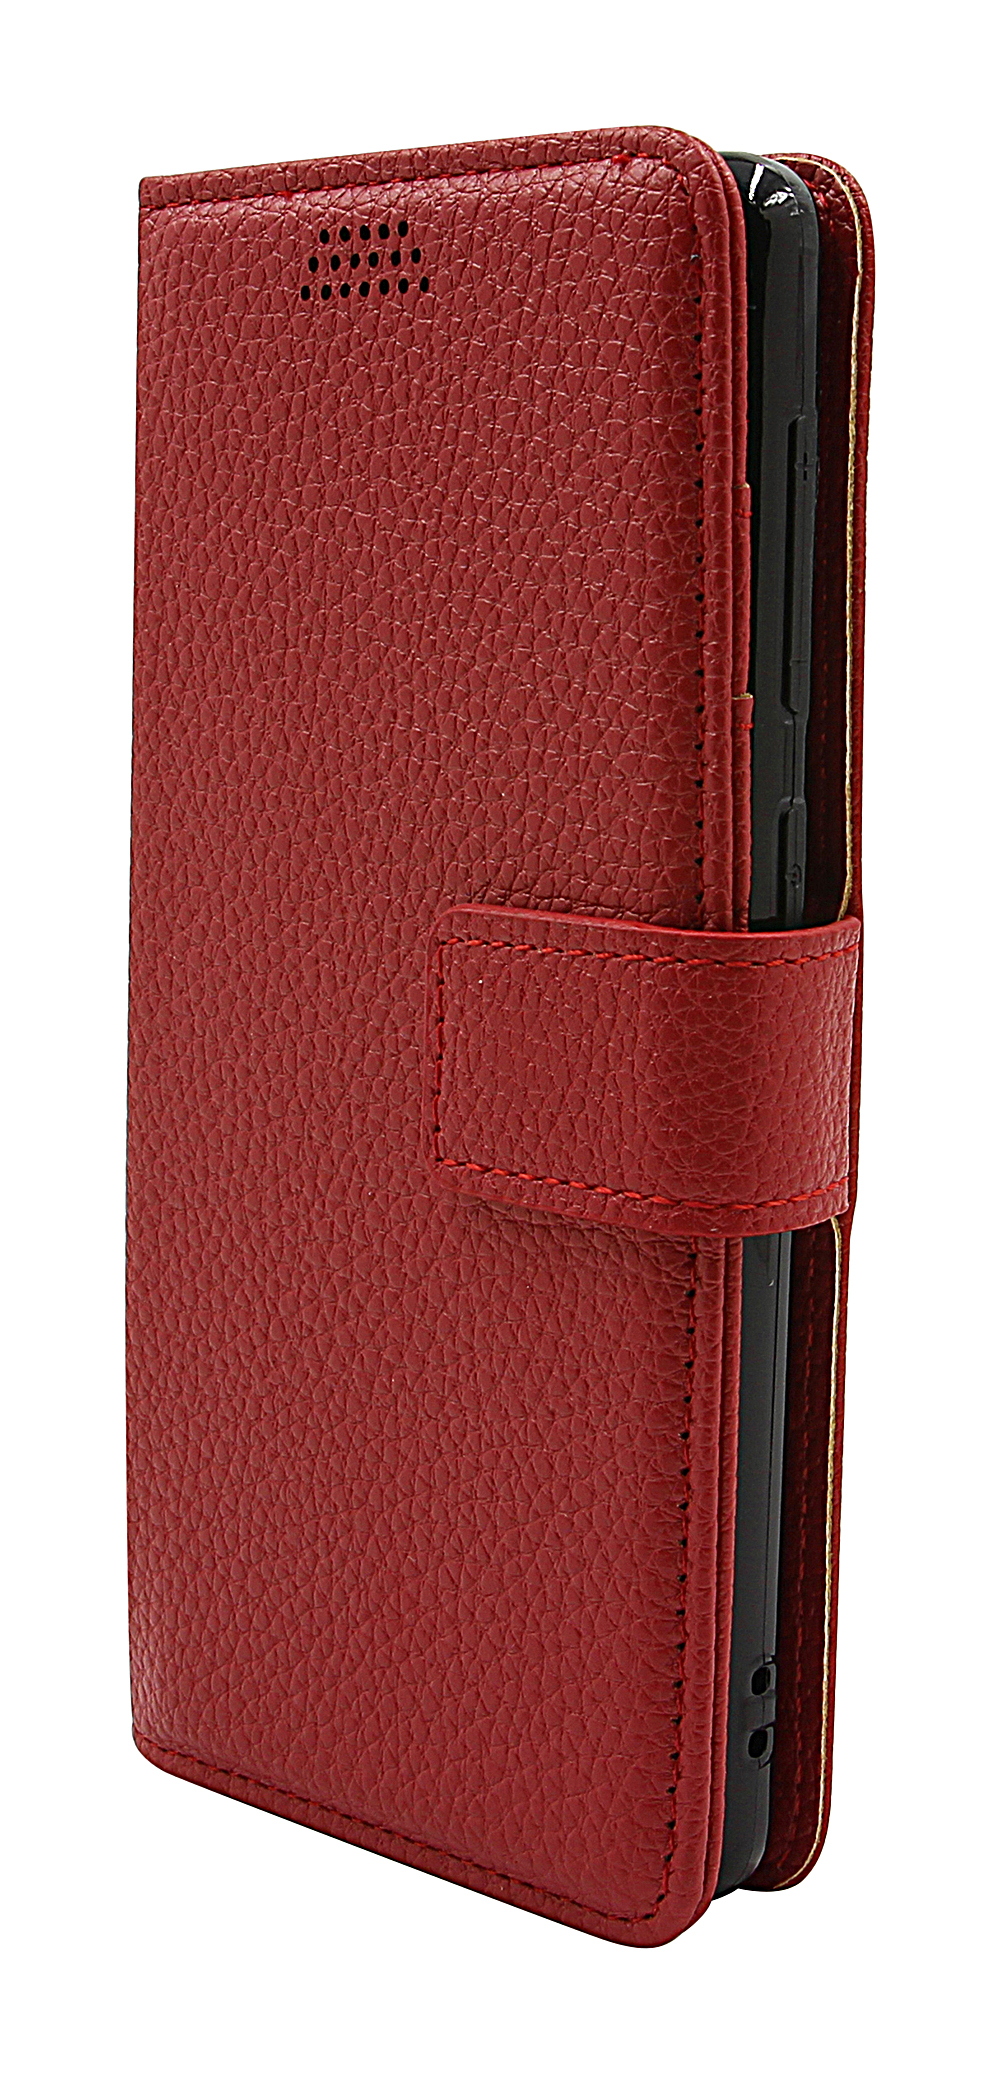 New Standcase Wallet Huawei Mate 9 Pro (LON-L29)